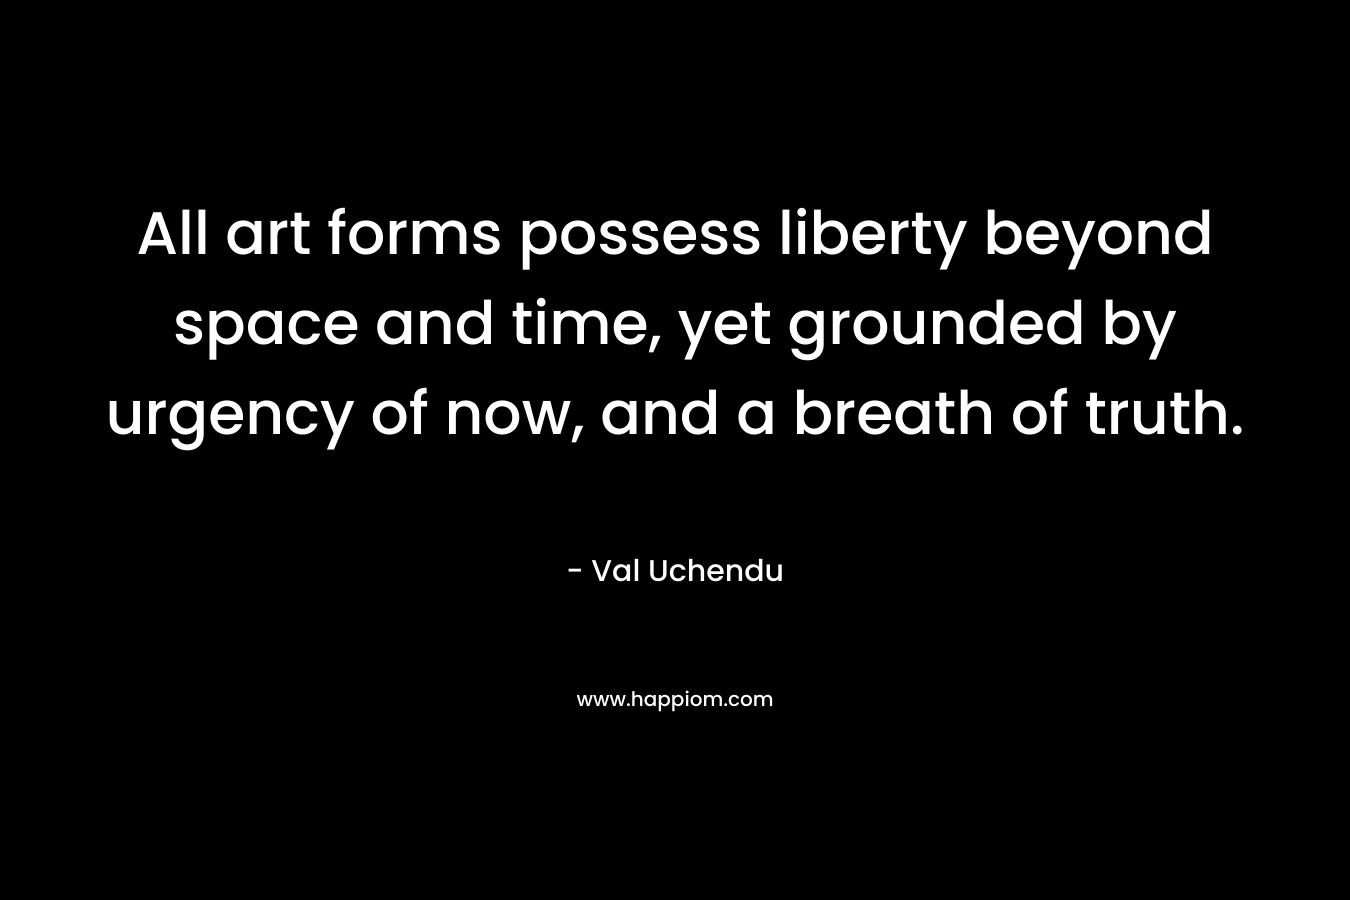 All art forms possess liberty beyond space and time, yet grounded by urgency of now, and a breath of truth.